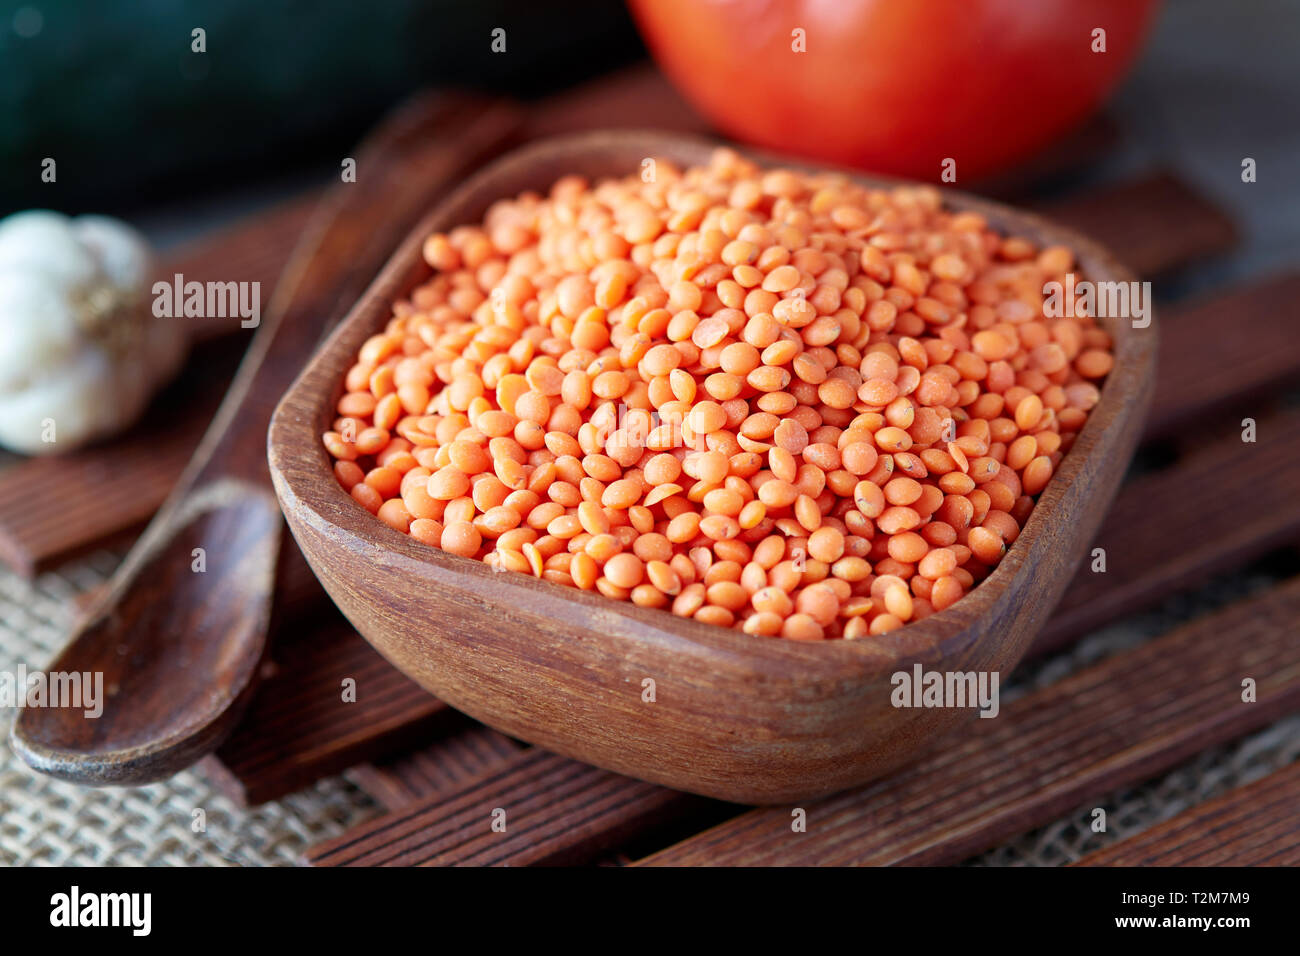 Raw uncooked red lentils (lens culinaris) in wooden bowl Stock Photo ...